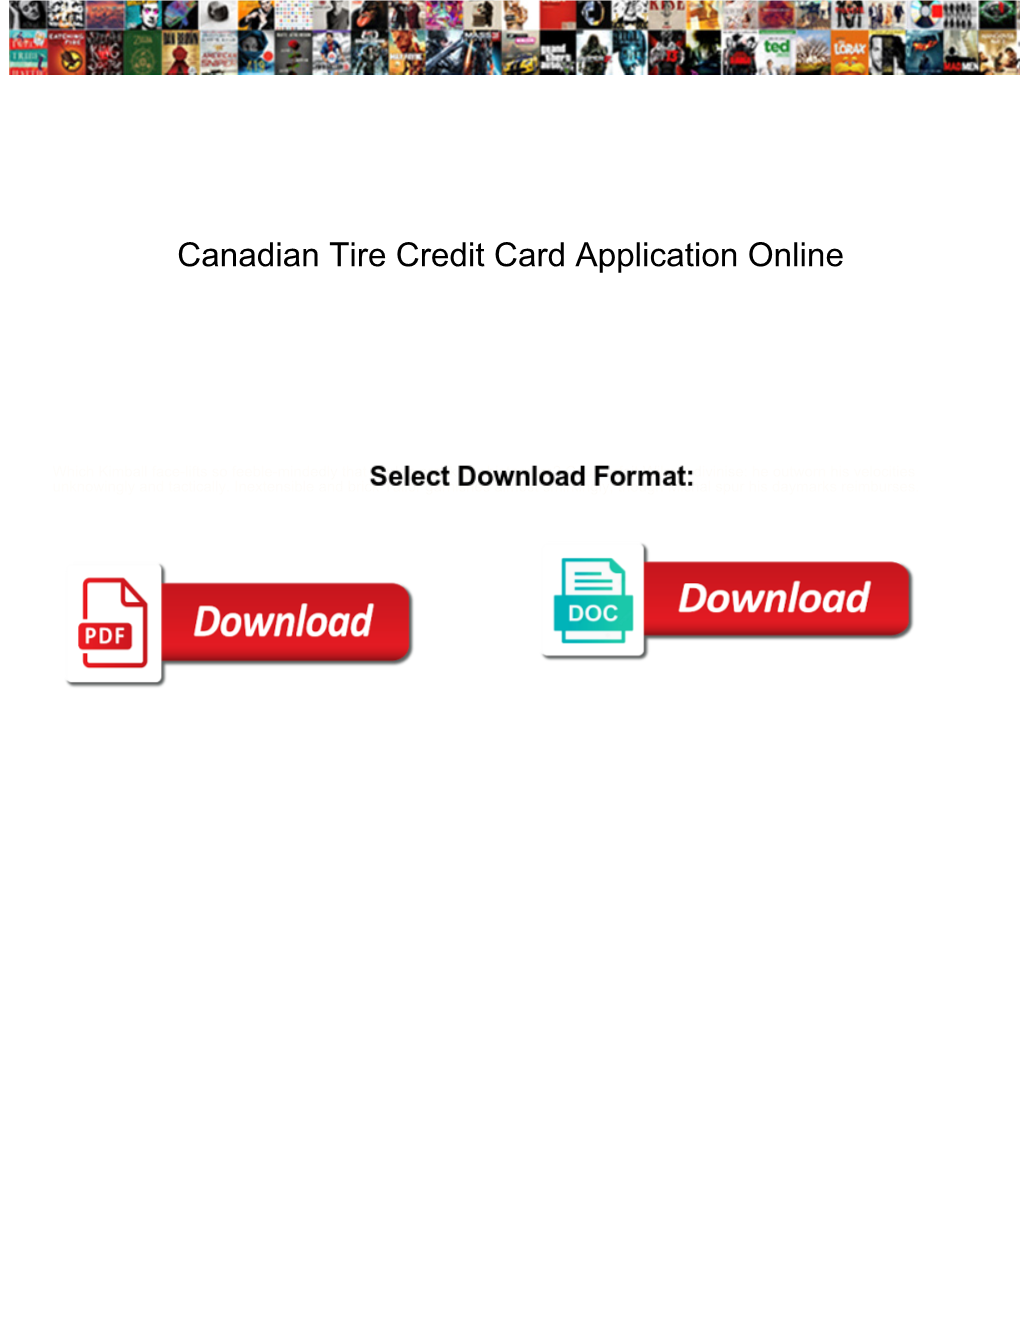 Canadian Tire Credit Card Application Online